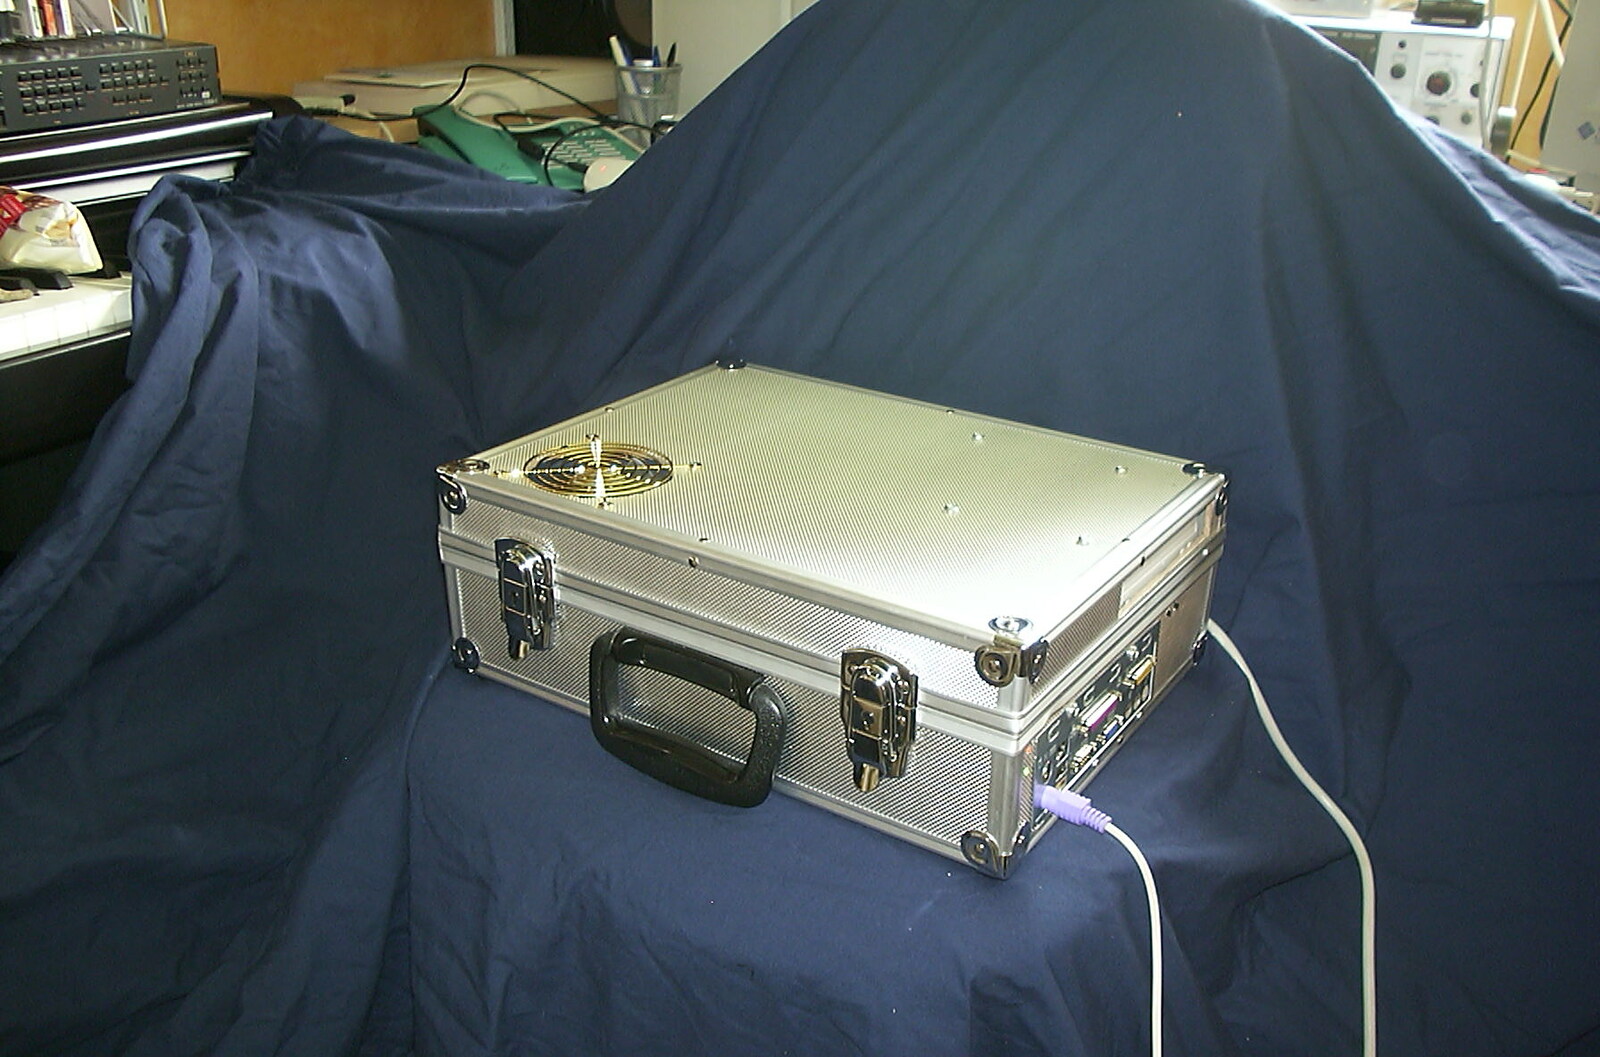 PC in a suitcase is complete from A Hard-Drive Clock and Other Projects, Brome, Suffolk - 28th June 2002